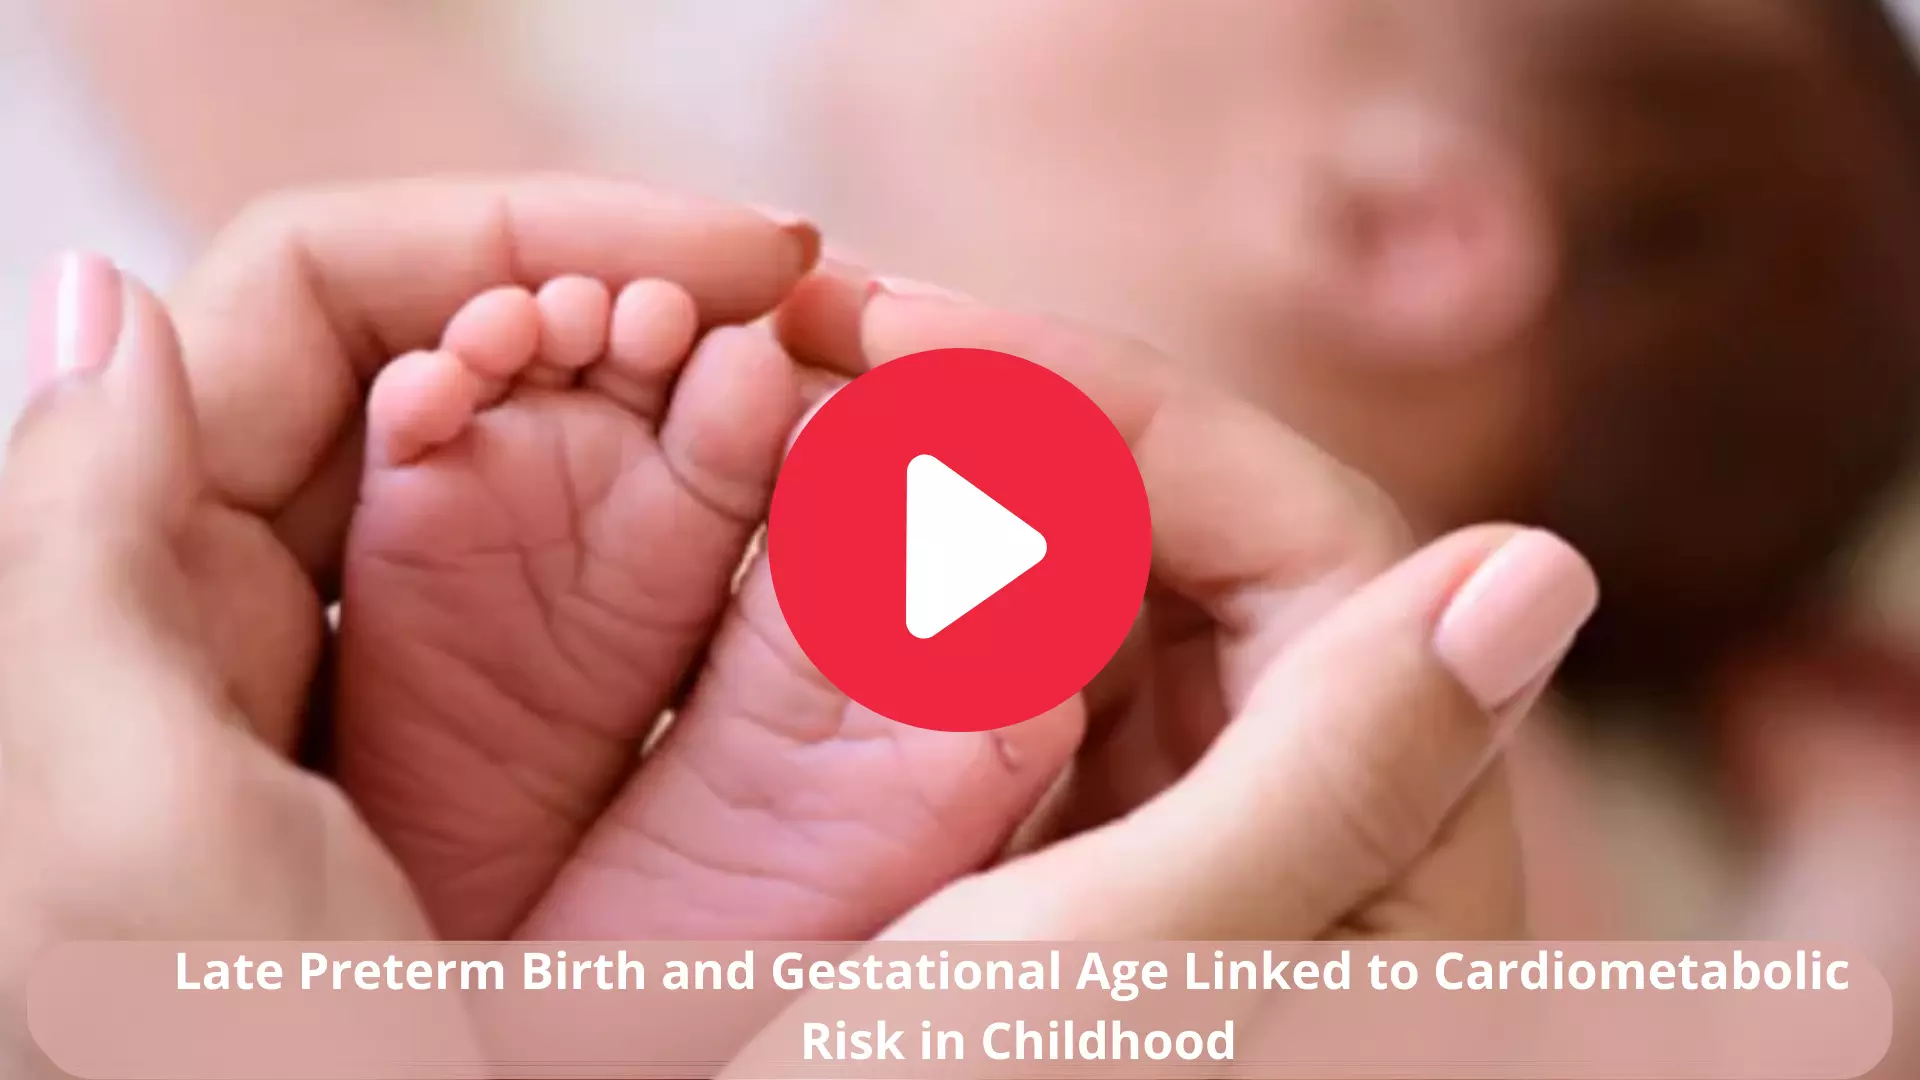 Late Preterm Birth and Gestational Age Linked to Cardiometabolic Risk in Childhood